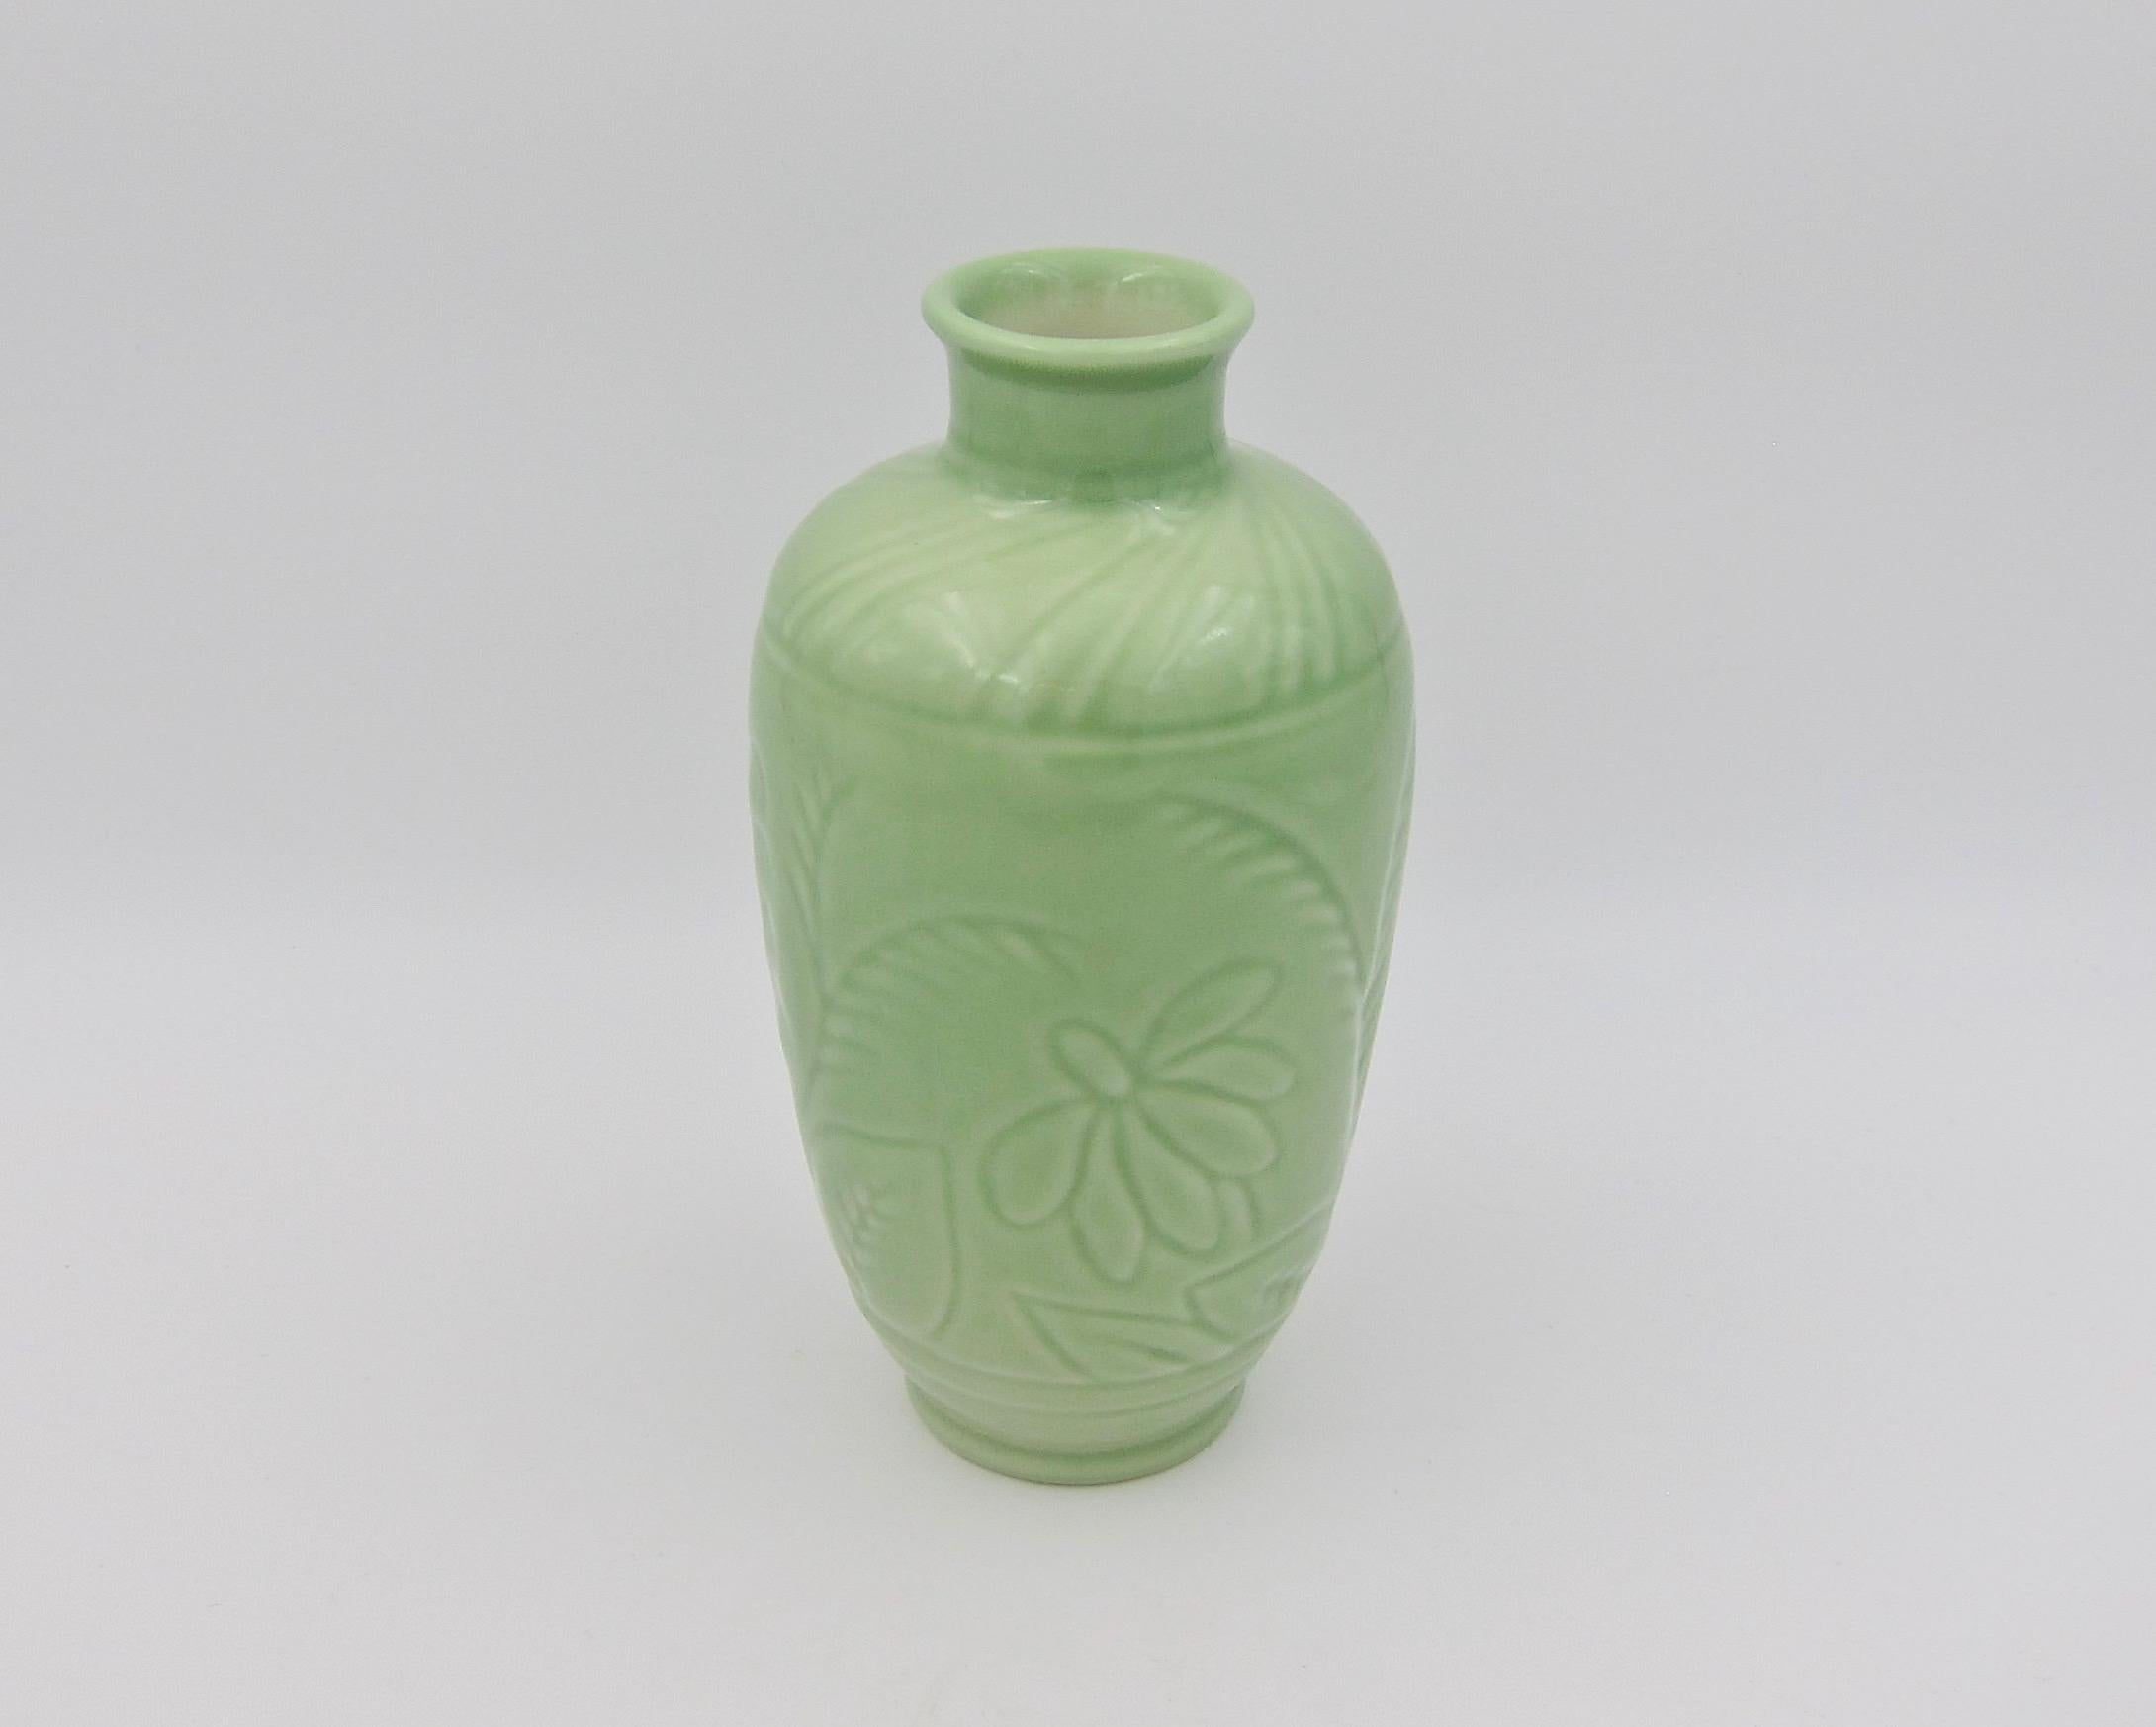 American Vintage Rookwood Pottery Vase with Glossy Green Glaze, 1935